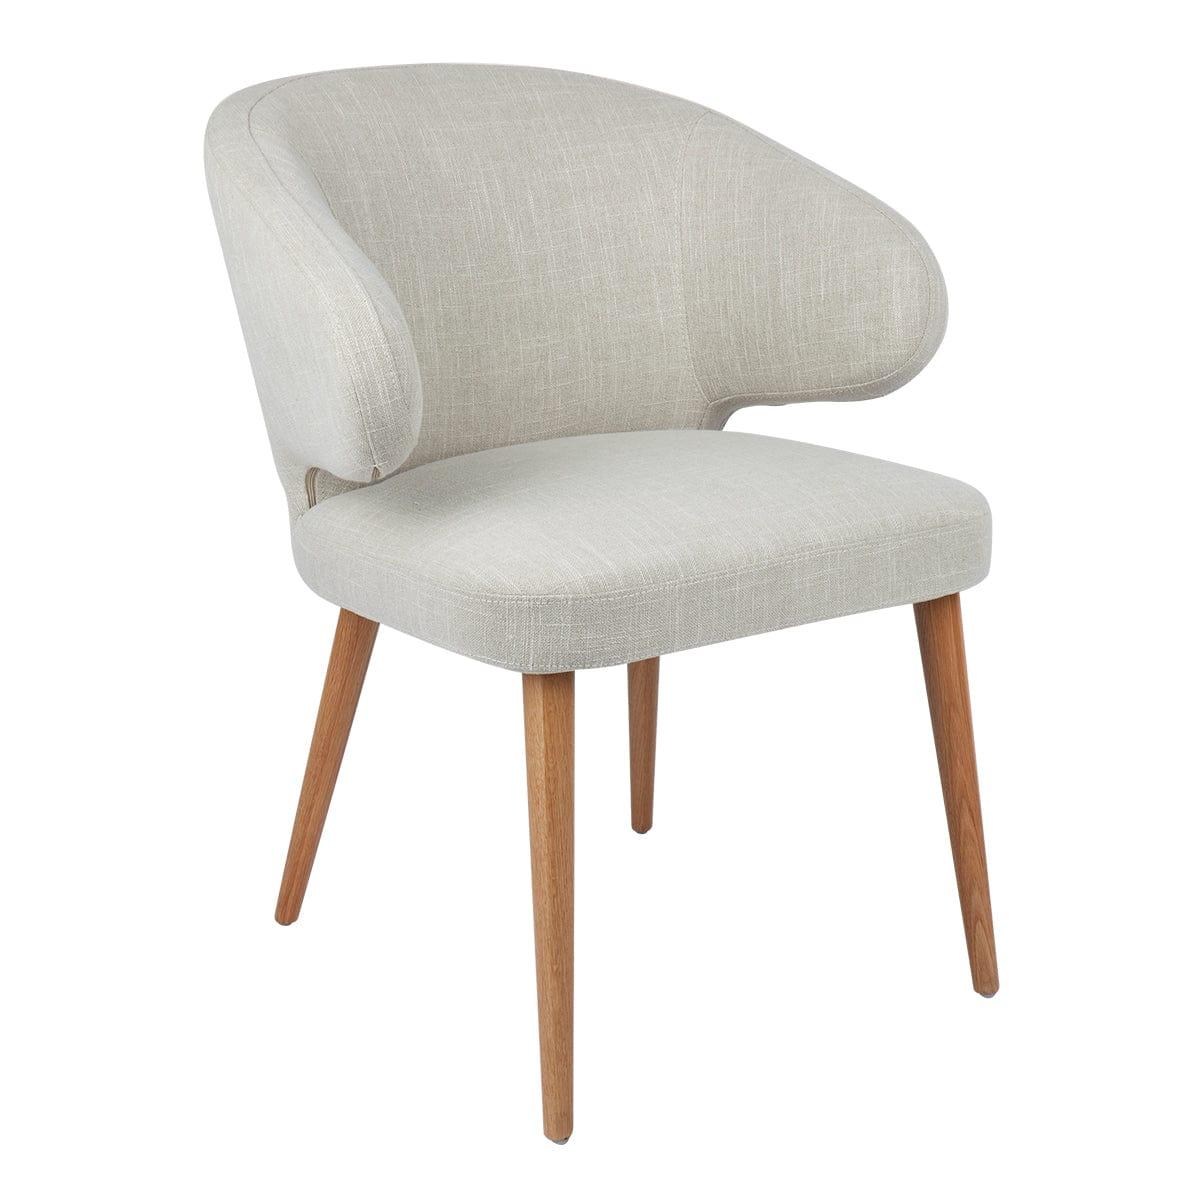 House Journey Harlow Natural Dining Chair - Natural Linen